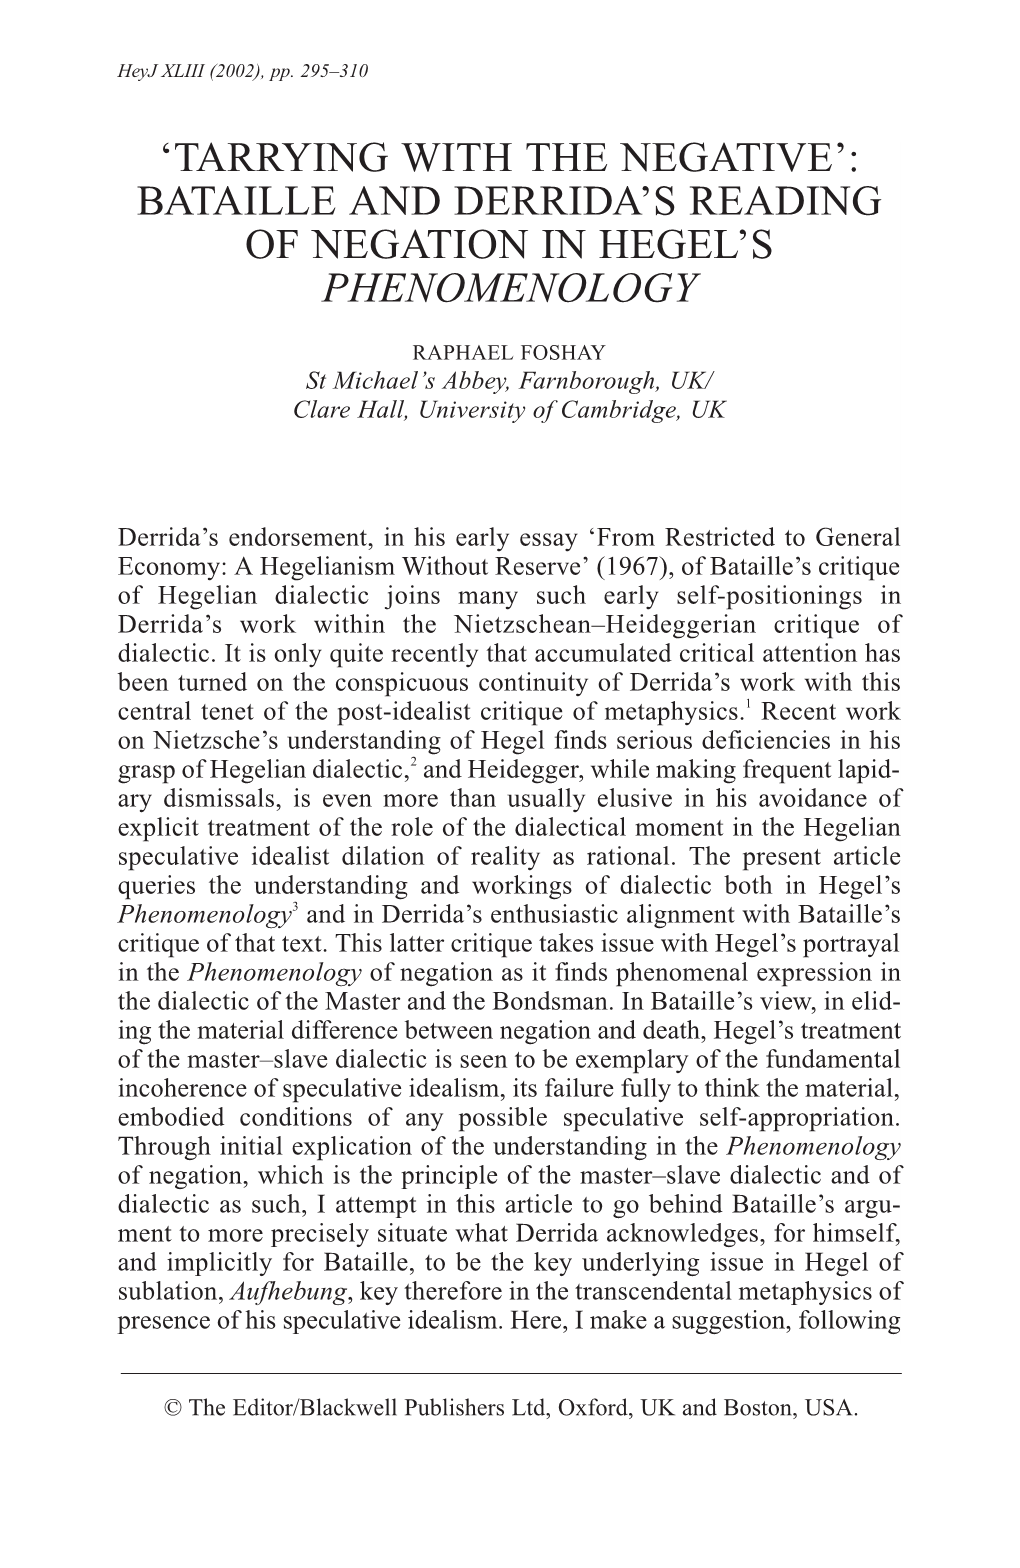 Bataille and Derrida's Reading Of